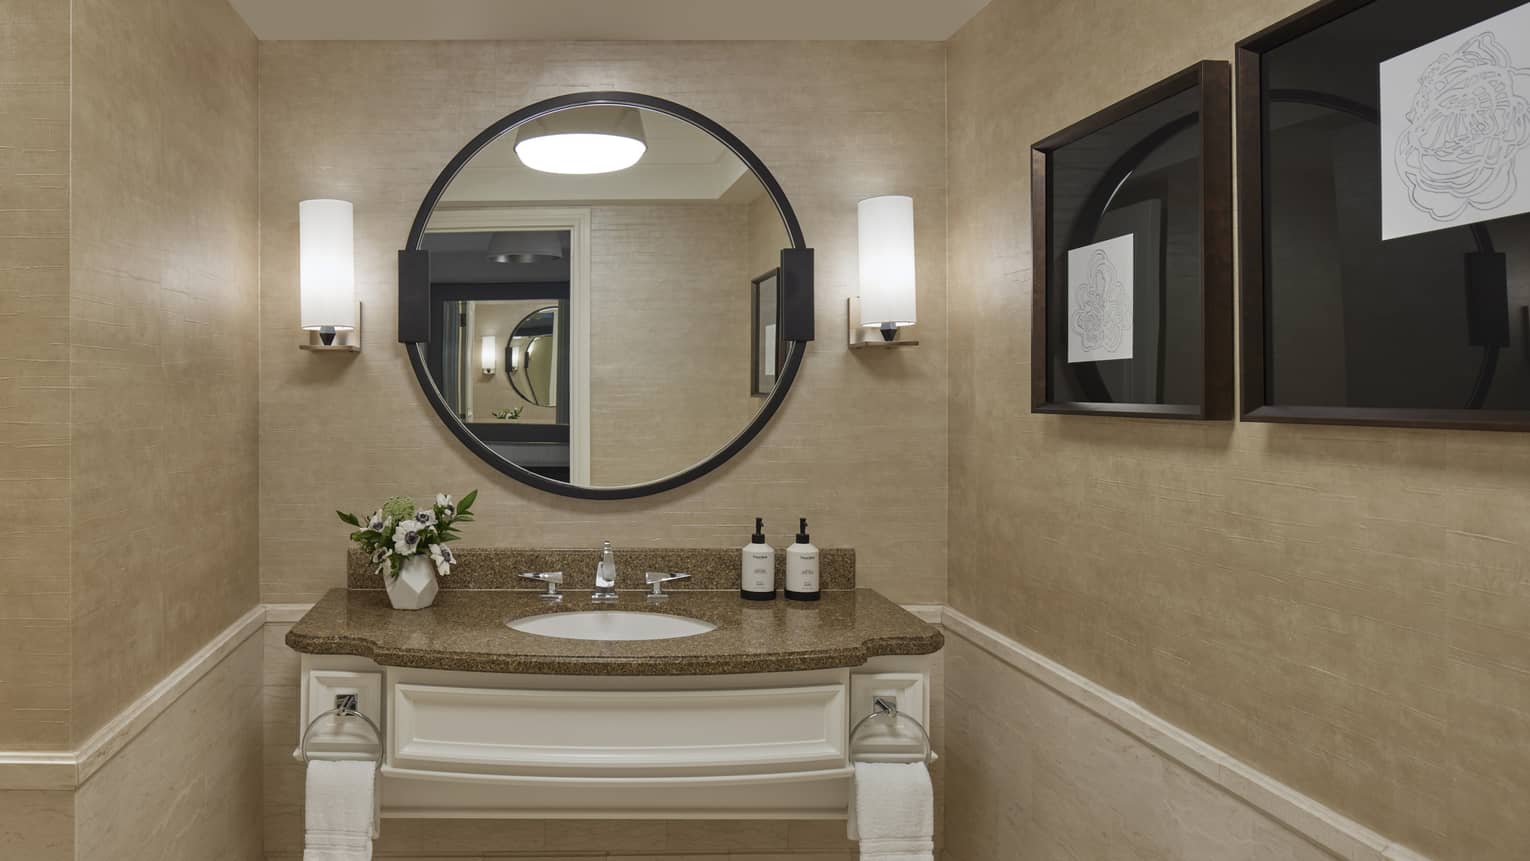 A bathroom with round mirror and sink.